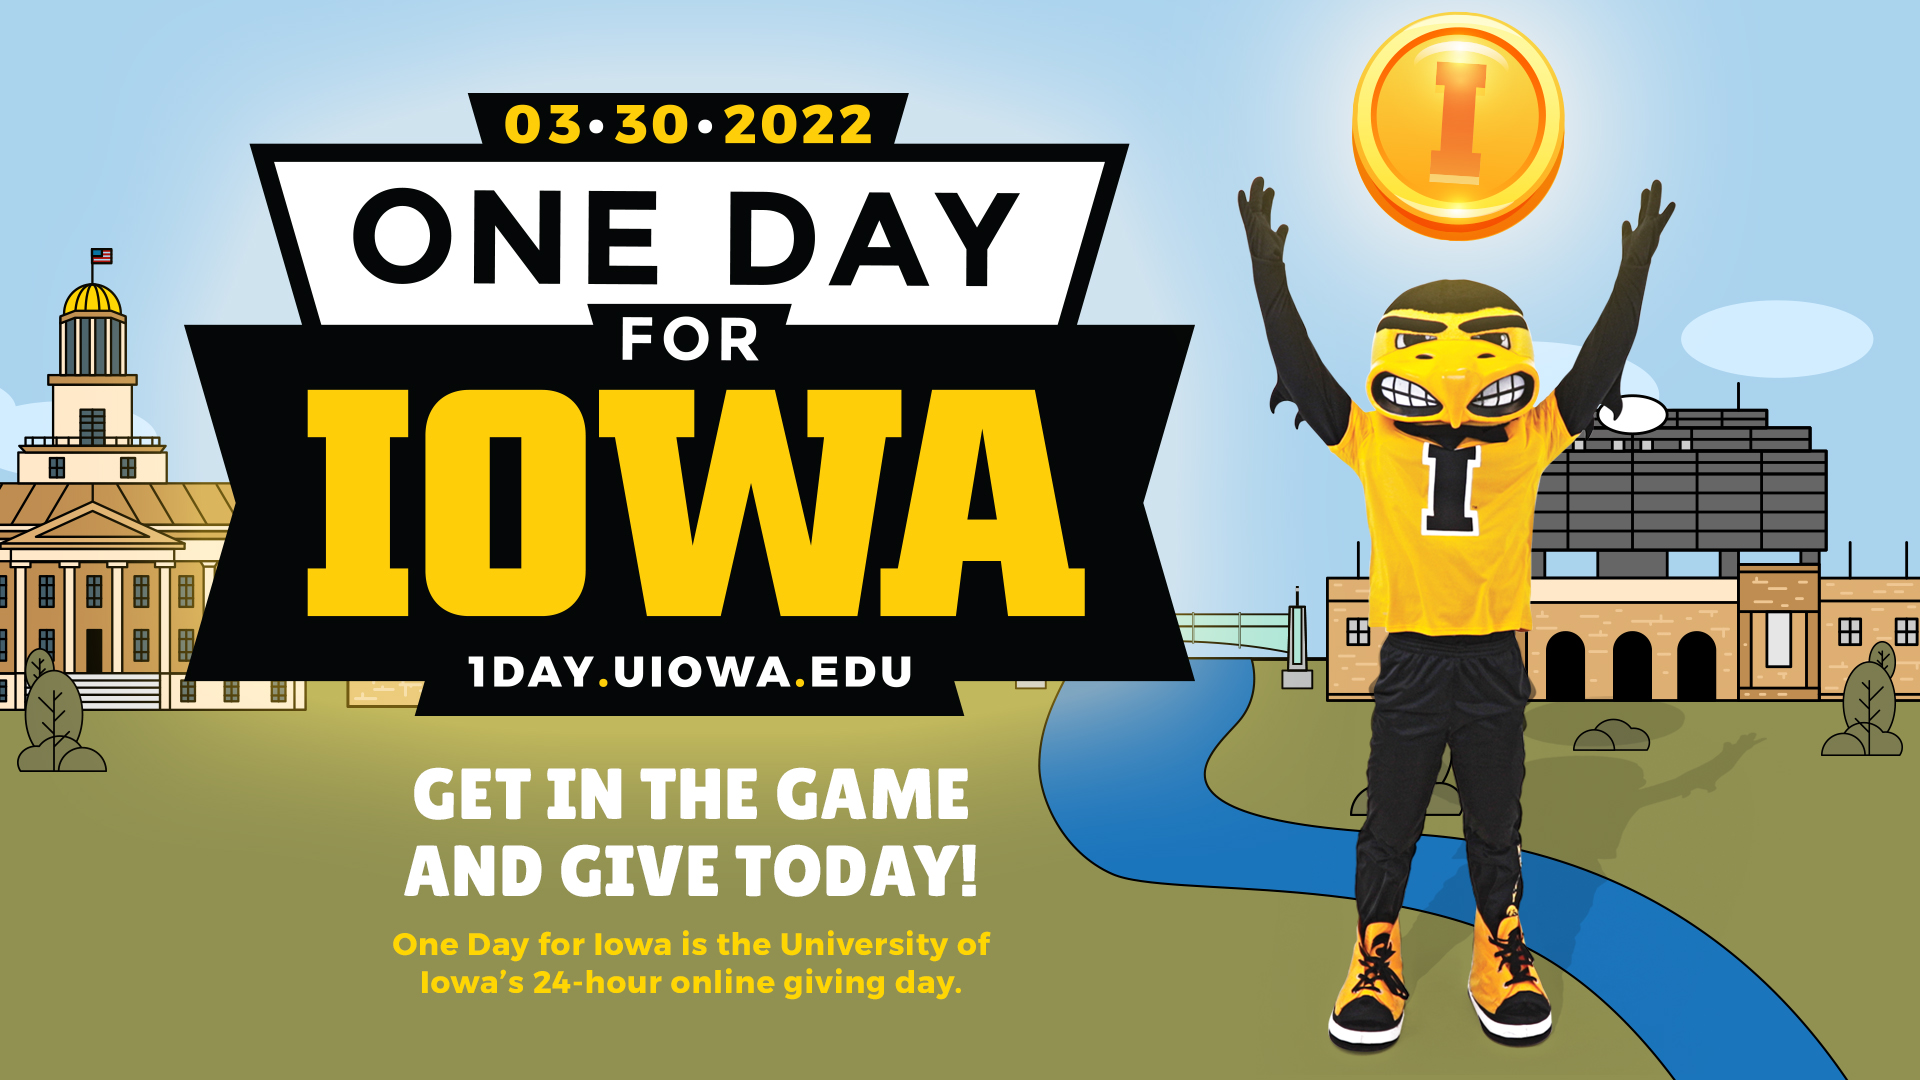 One Day for Iowa information, march 30